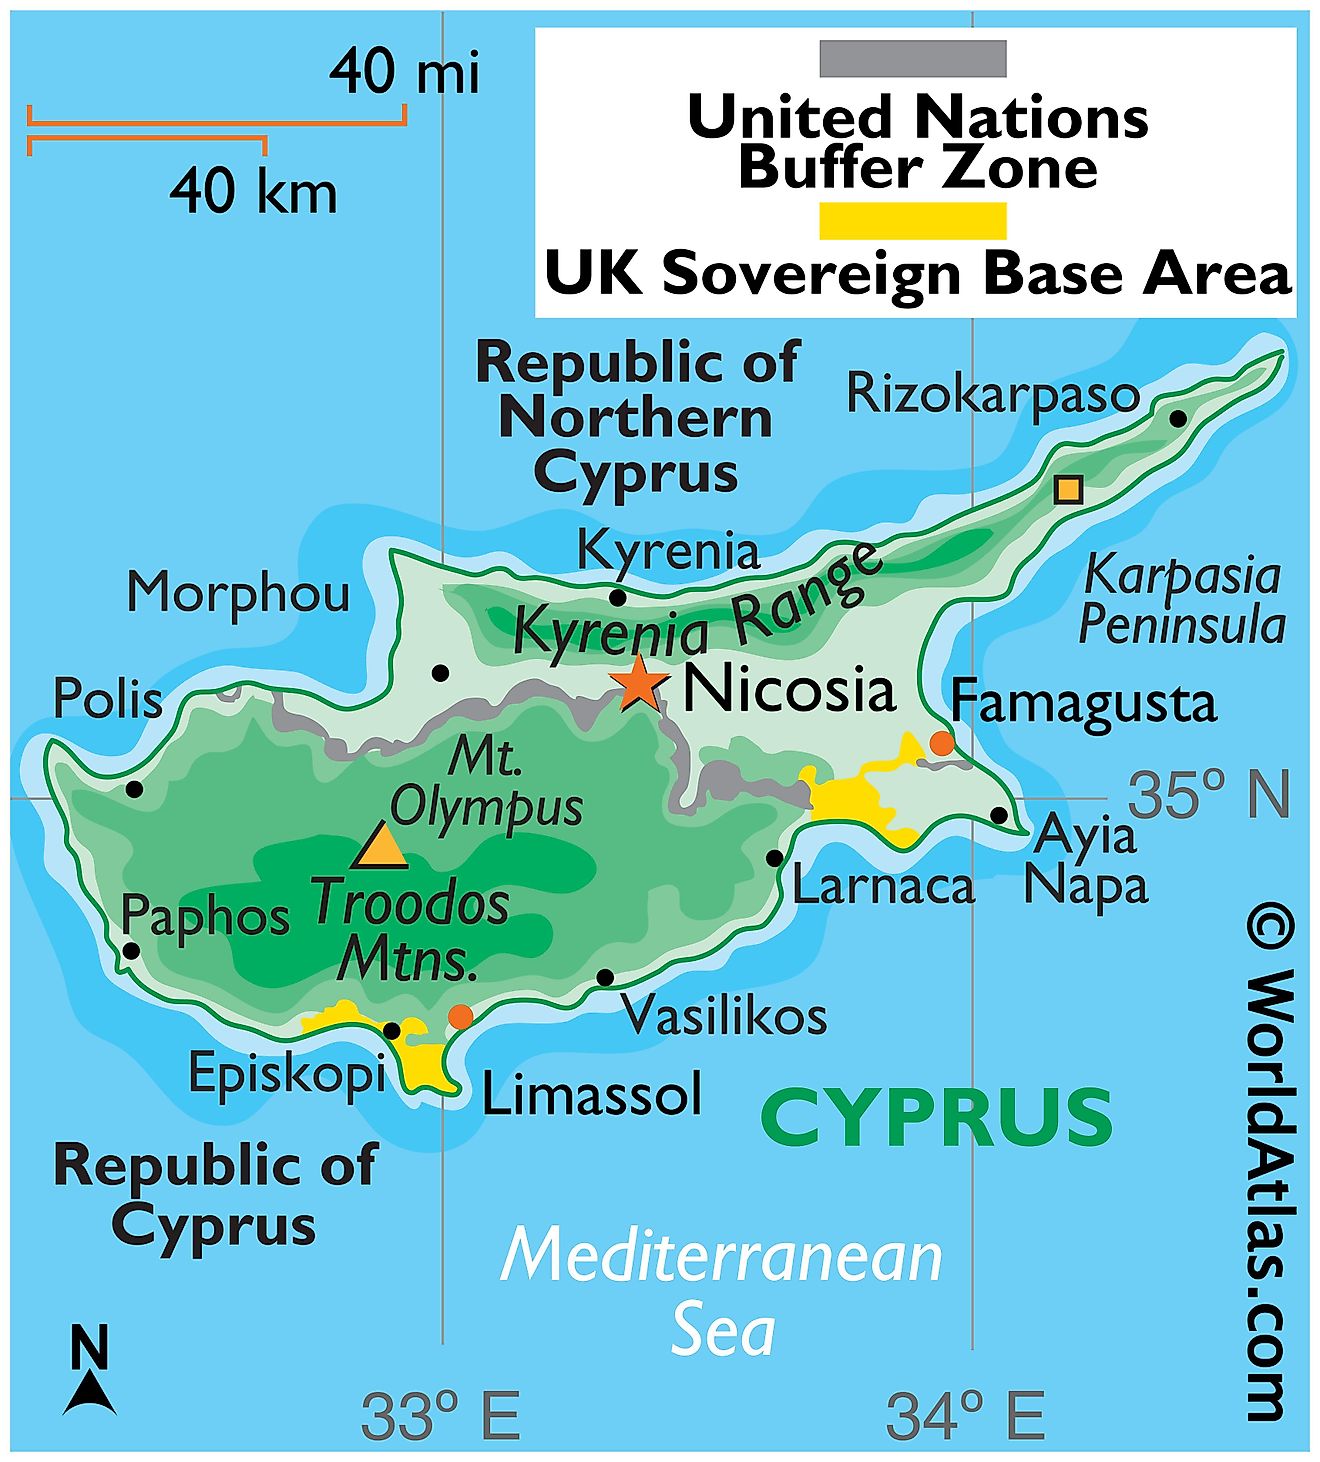 Physical Map of Cyprus showing relief, highest point, major mountain ranges, important urban centres, etc.